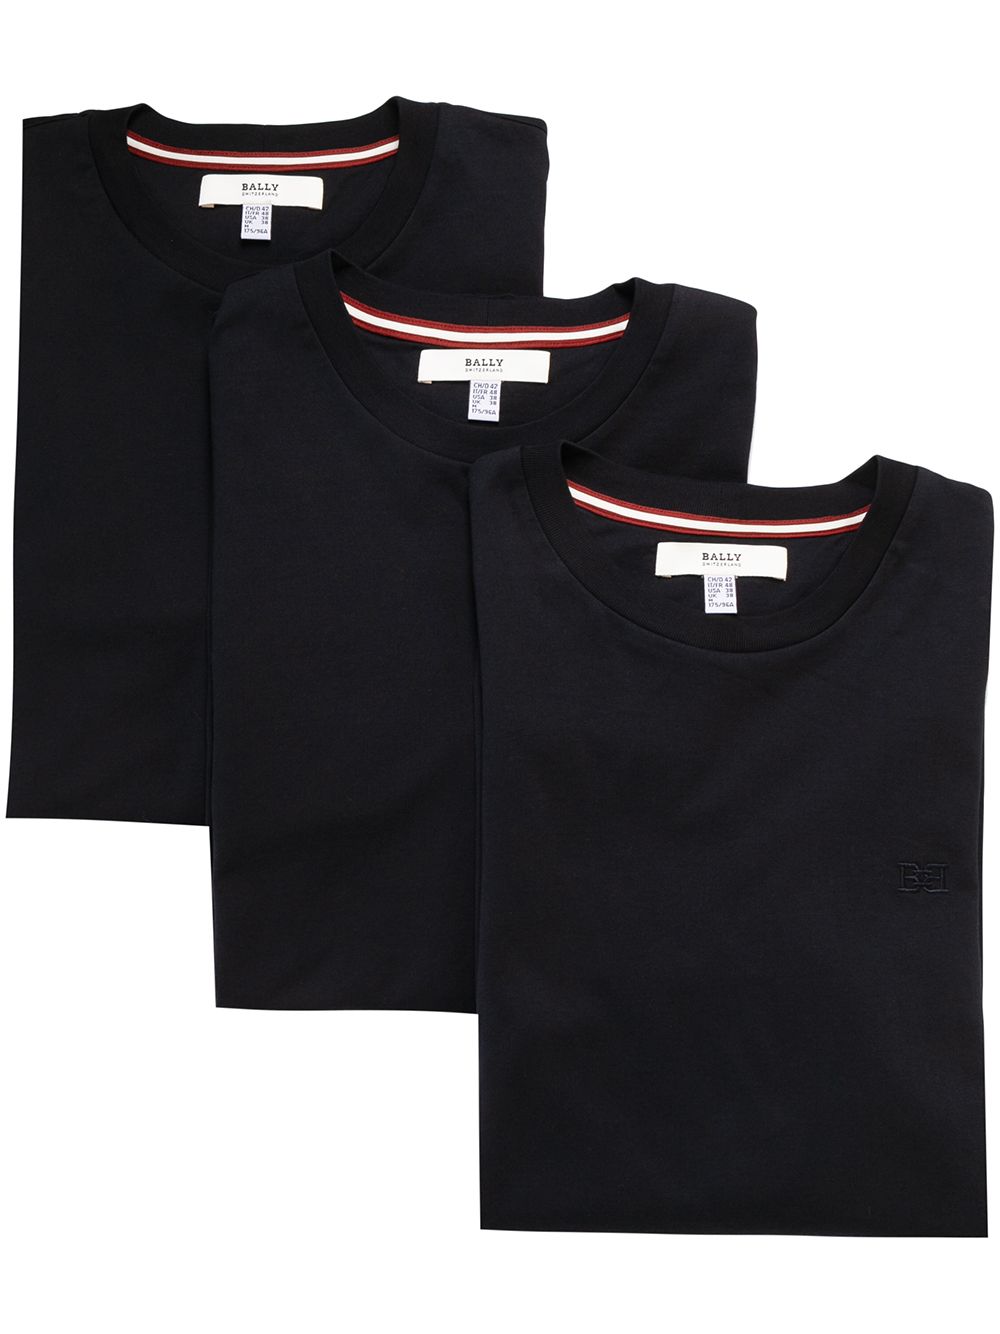 embroidered-logo T-shirt triple pack